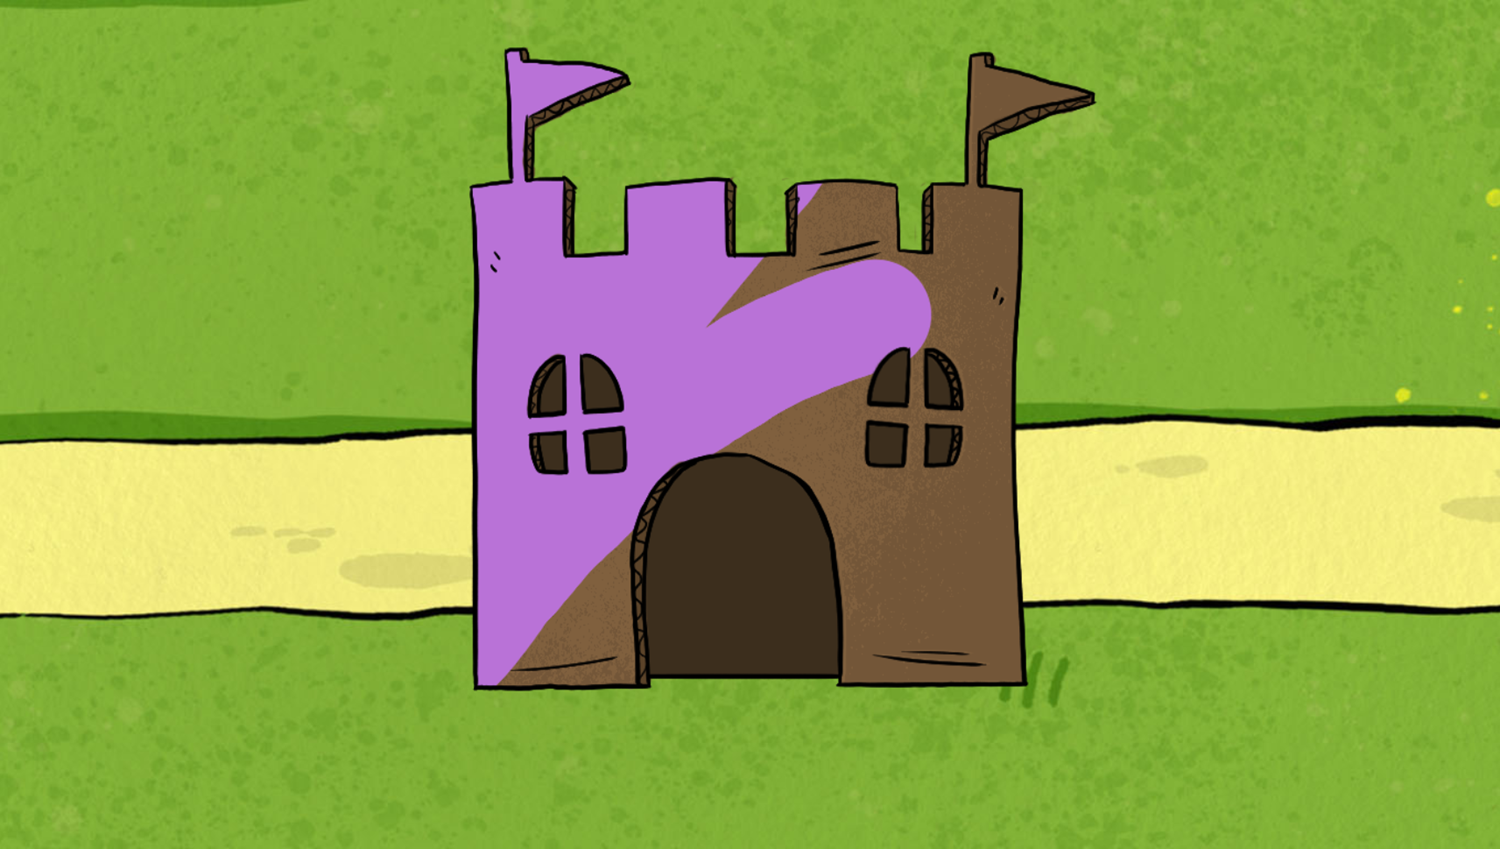 Clifford the Big Red Dog: All Around Birdwell Paint Castle Play Screenshot.